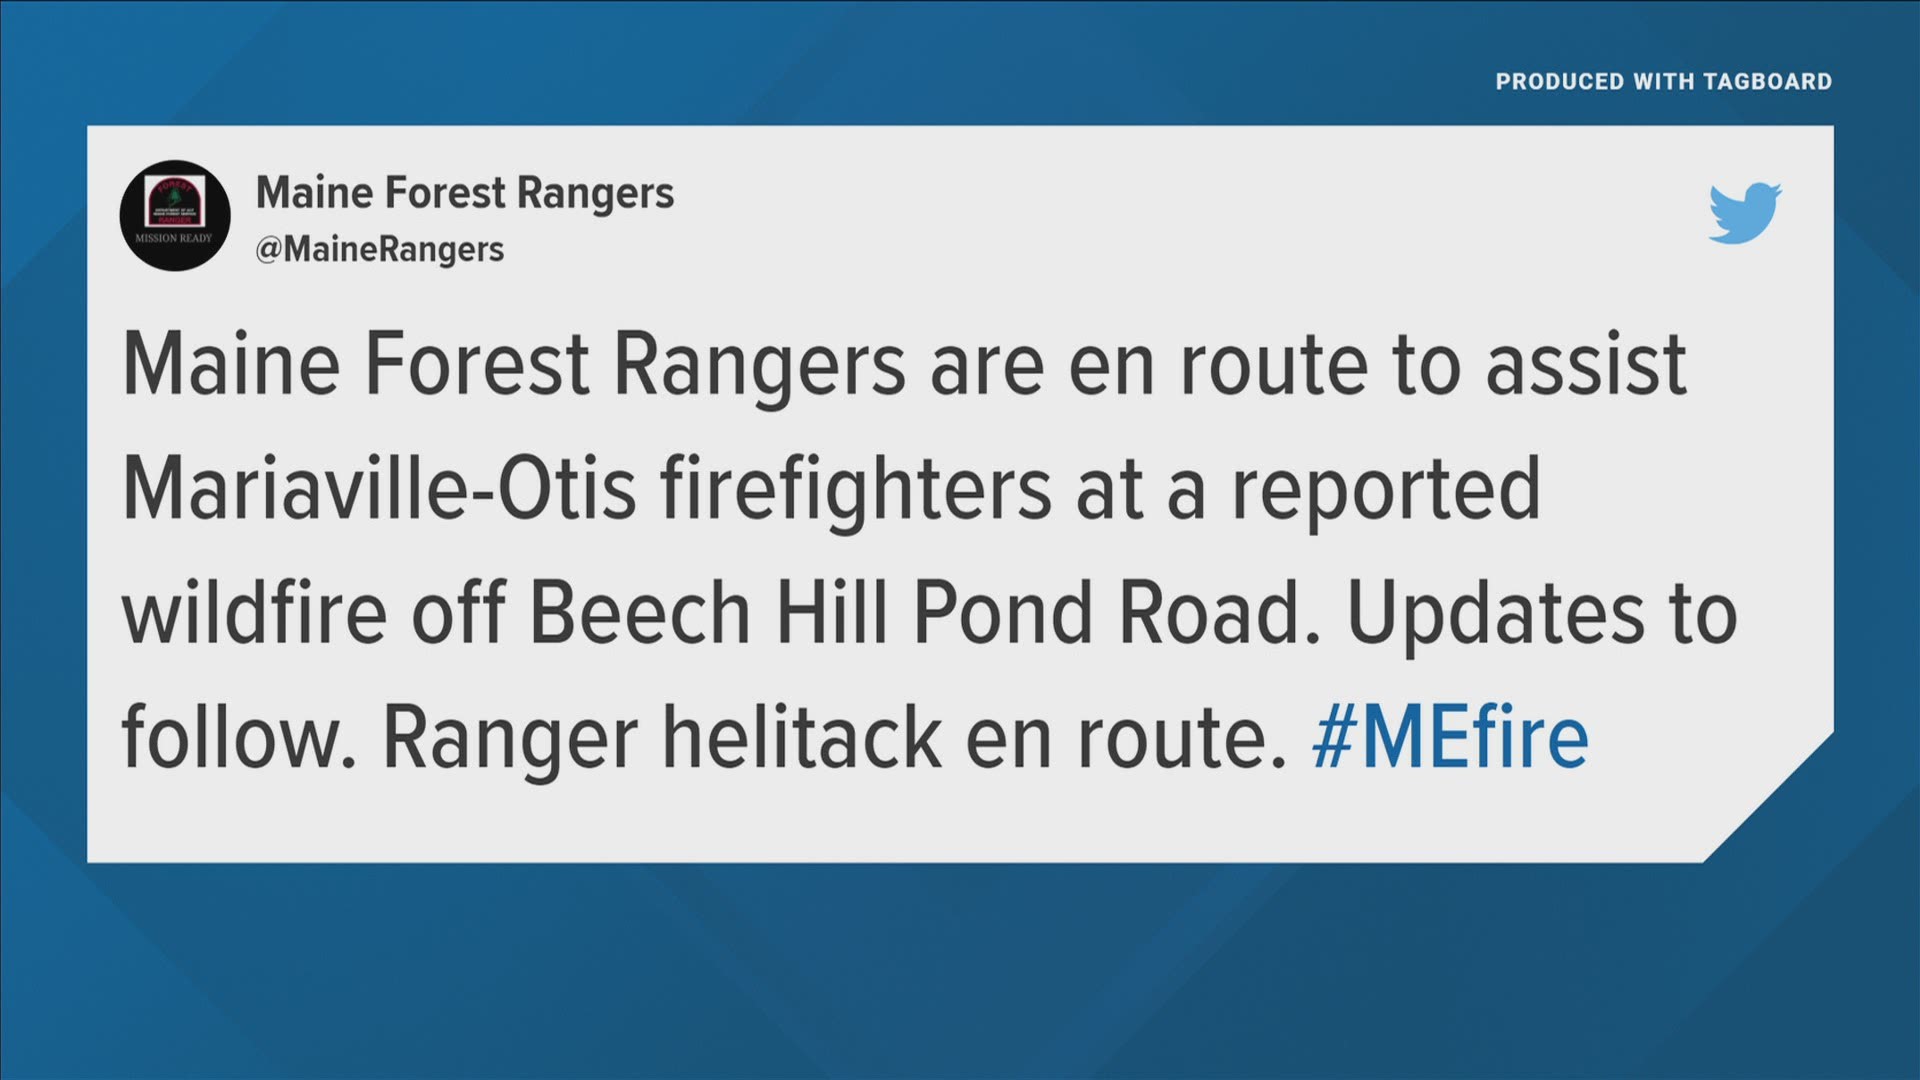 Maine Forest Rangers are helping firefighters in the Mariaville and Otis area off Beech Hill Pond Rd. And there is another fire in the Lubec area mostly contained.